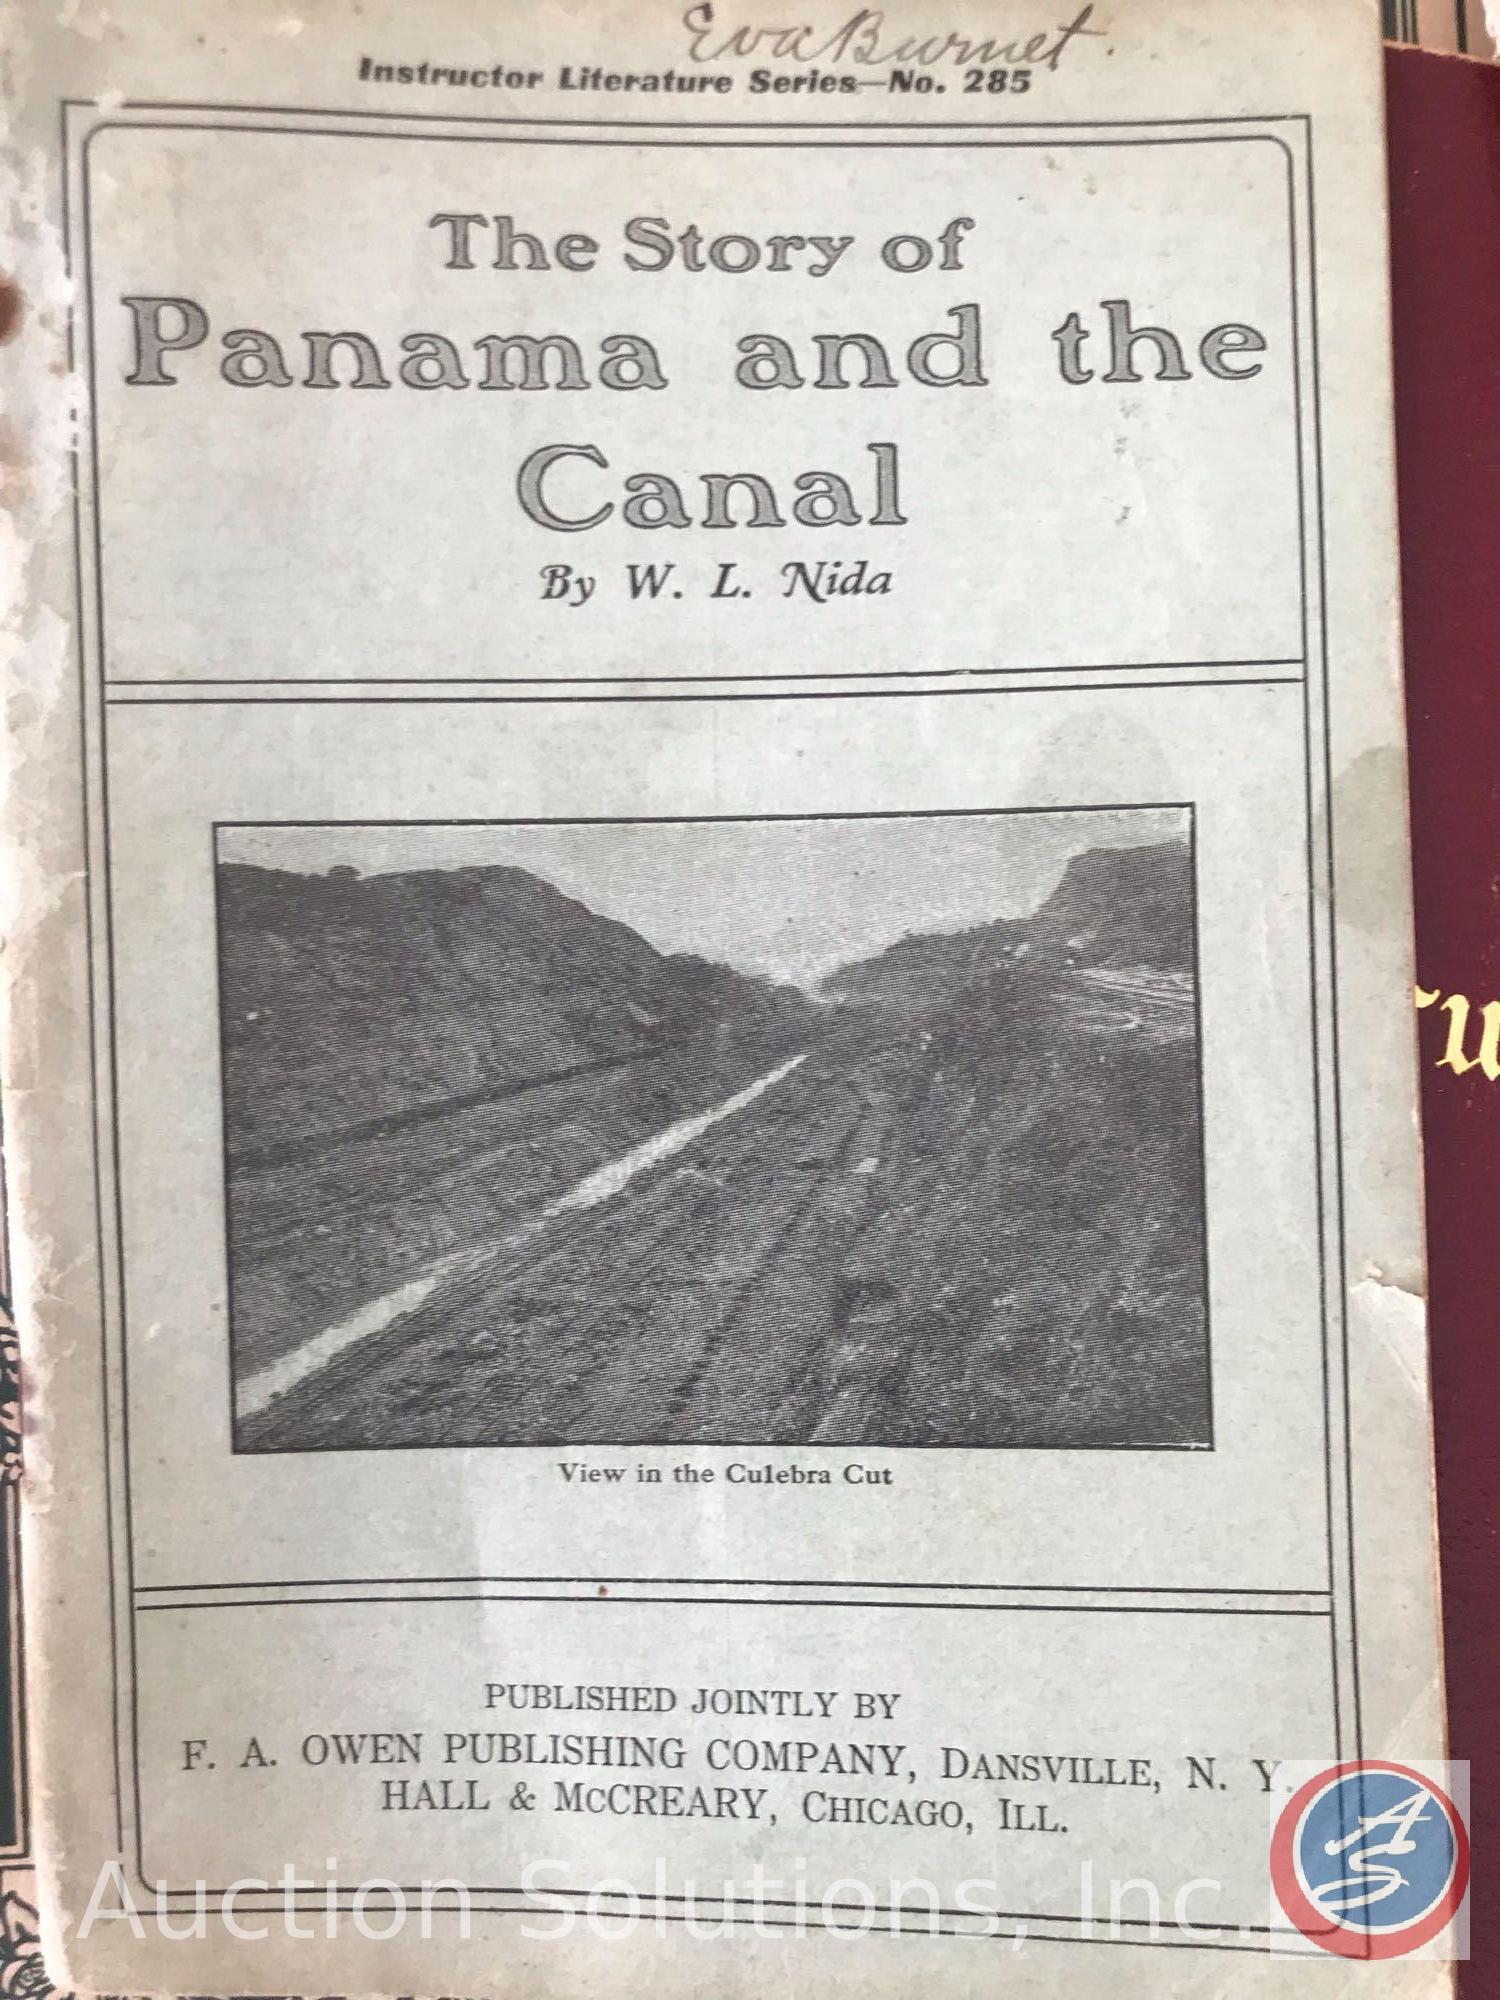 Ladies Home Journals (1914/'15), Home Floriculture, Hansel + Gretel Pop-up, Panama and the Canal,